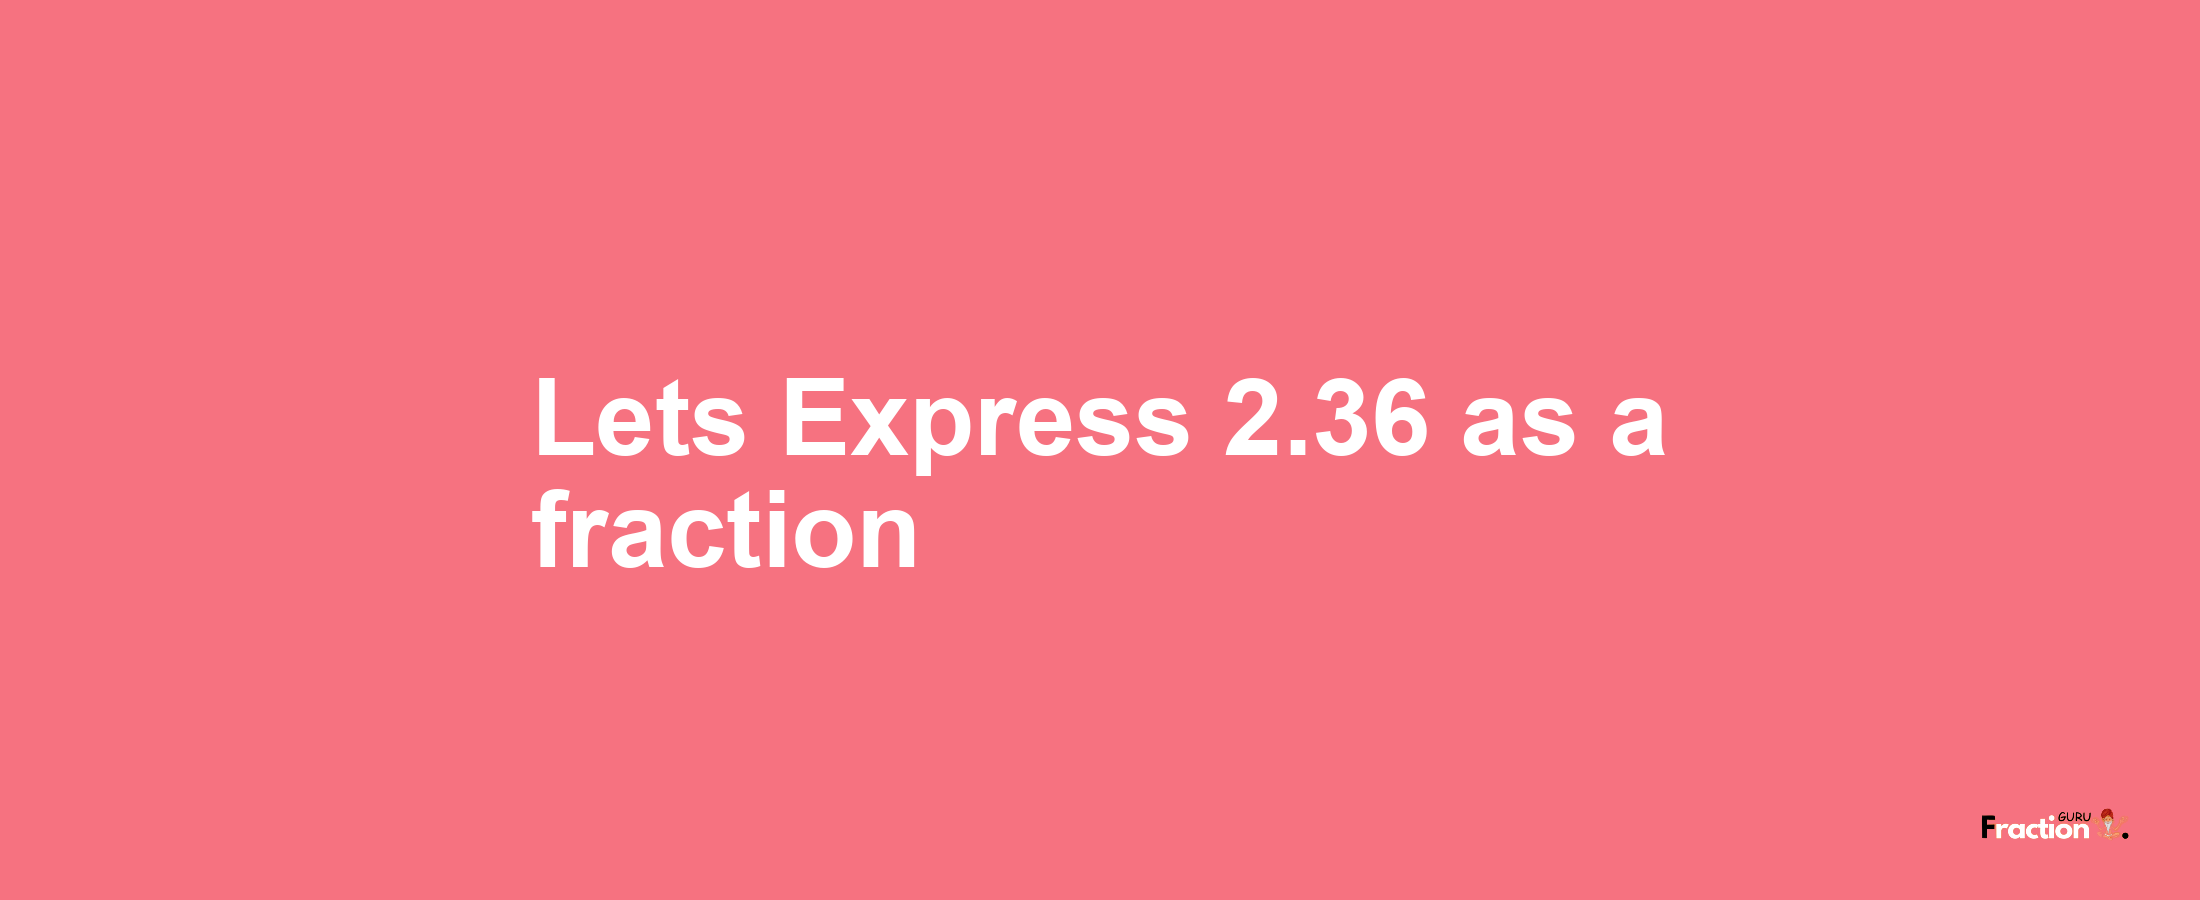 Lets Express 2.36 as afraction